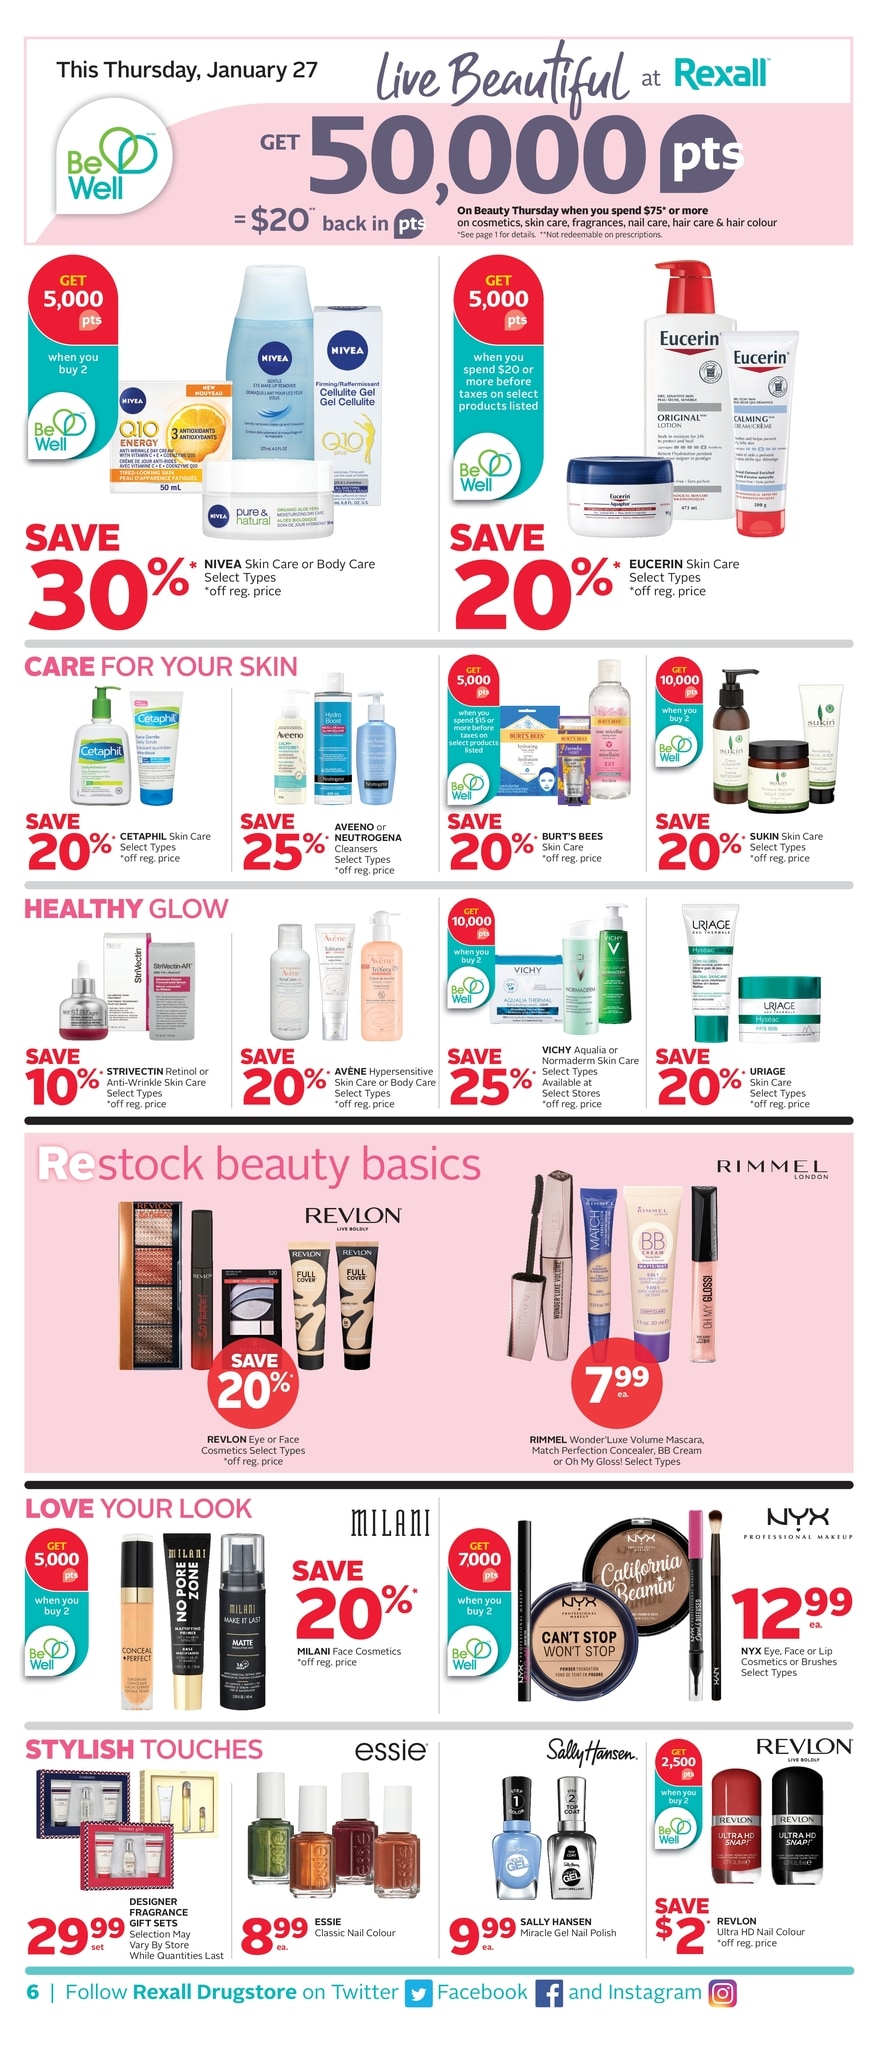 Rexall - Weekly Flyer Specials - Page 7